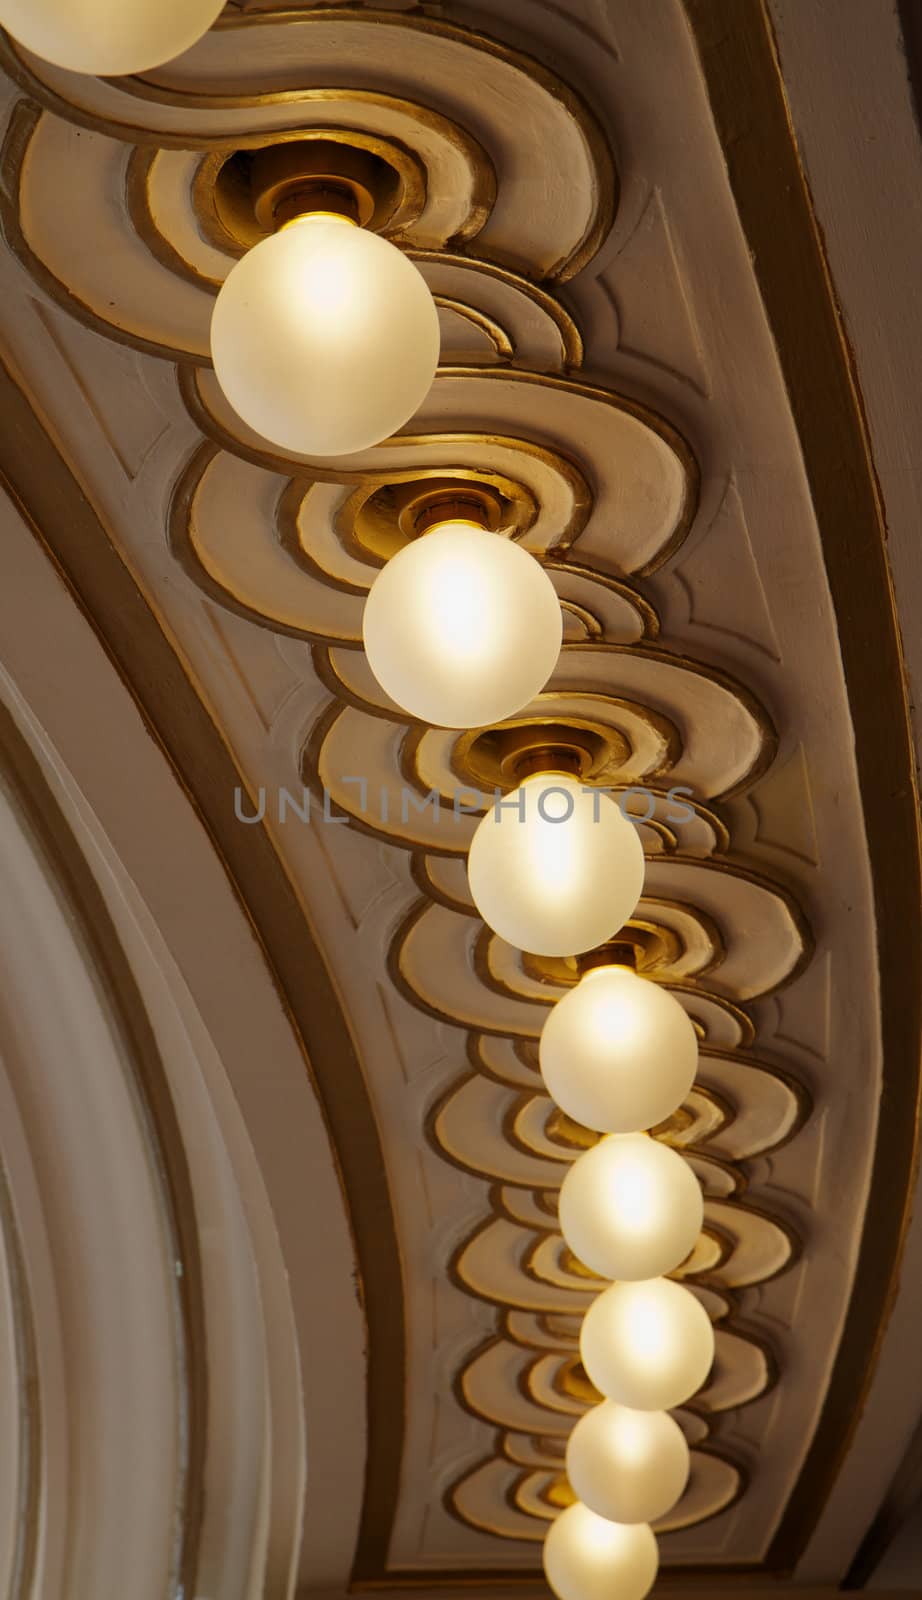 Curved row of ornate ceiling lights with gold trim